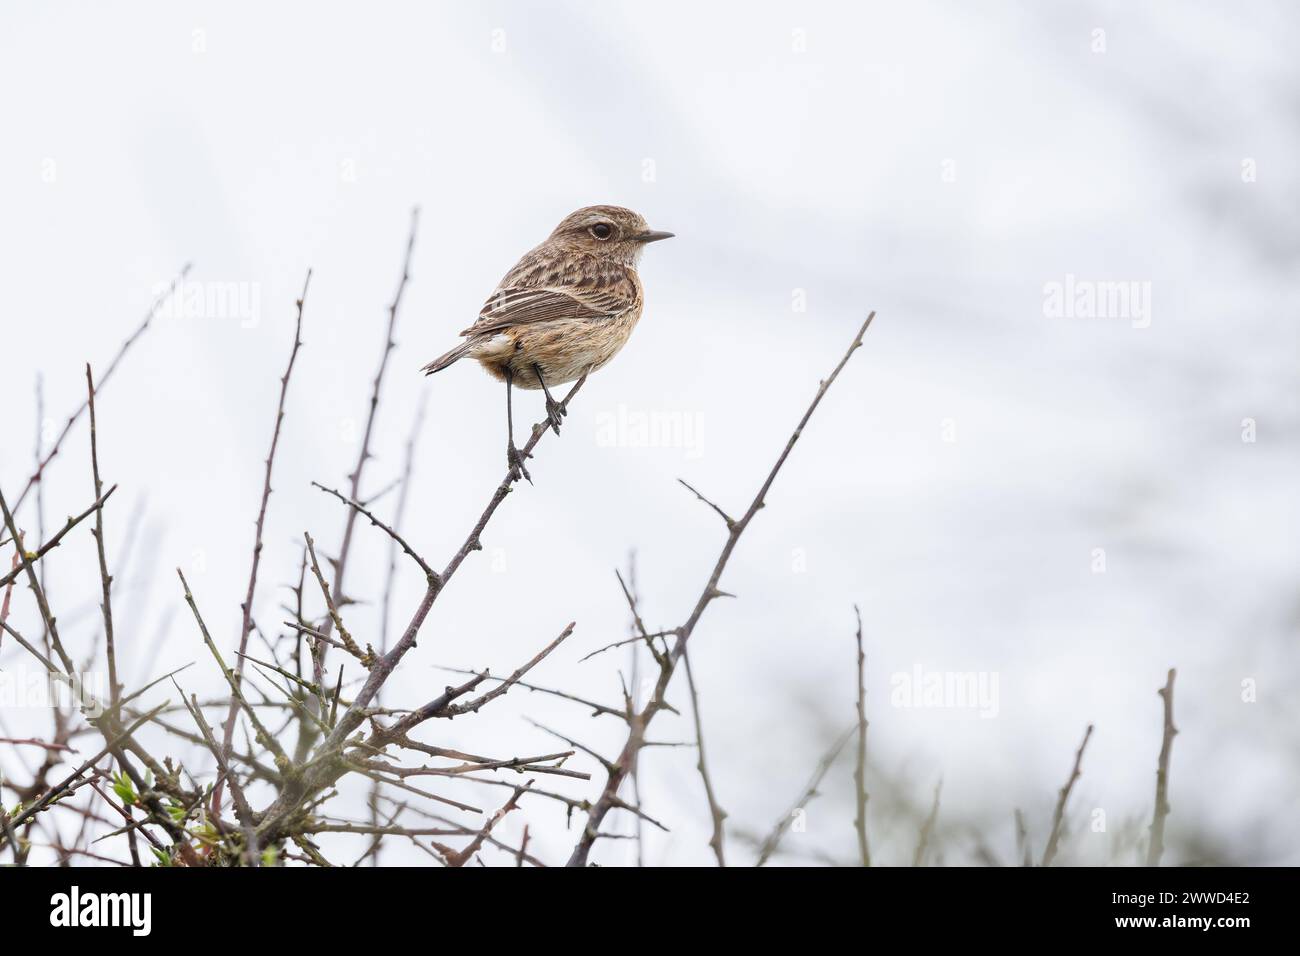 A female Stonechat (Saxicola torquata) perched on a branch against a neutral sky background. Stock Photo